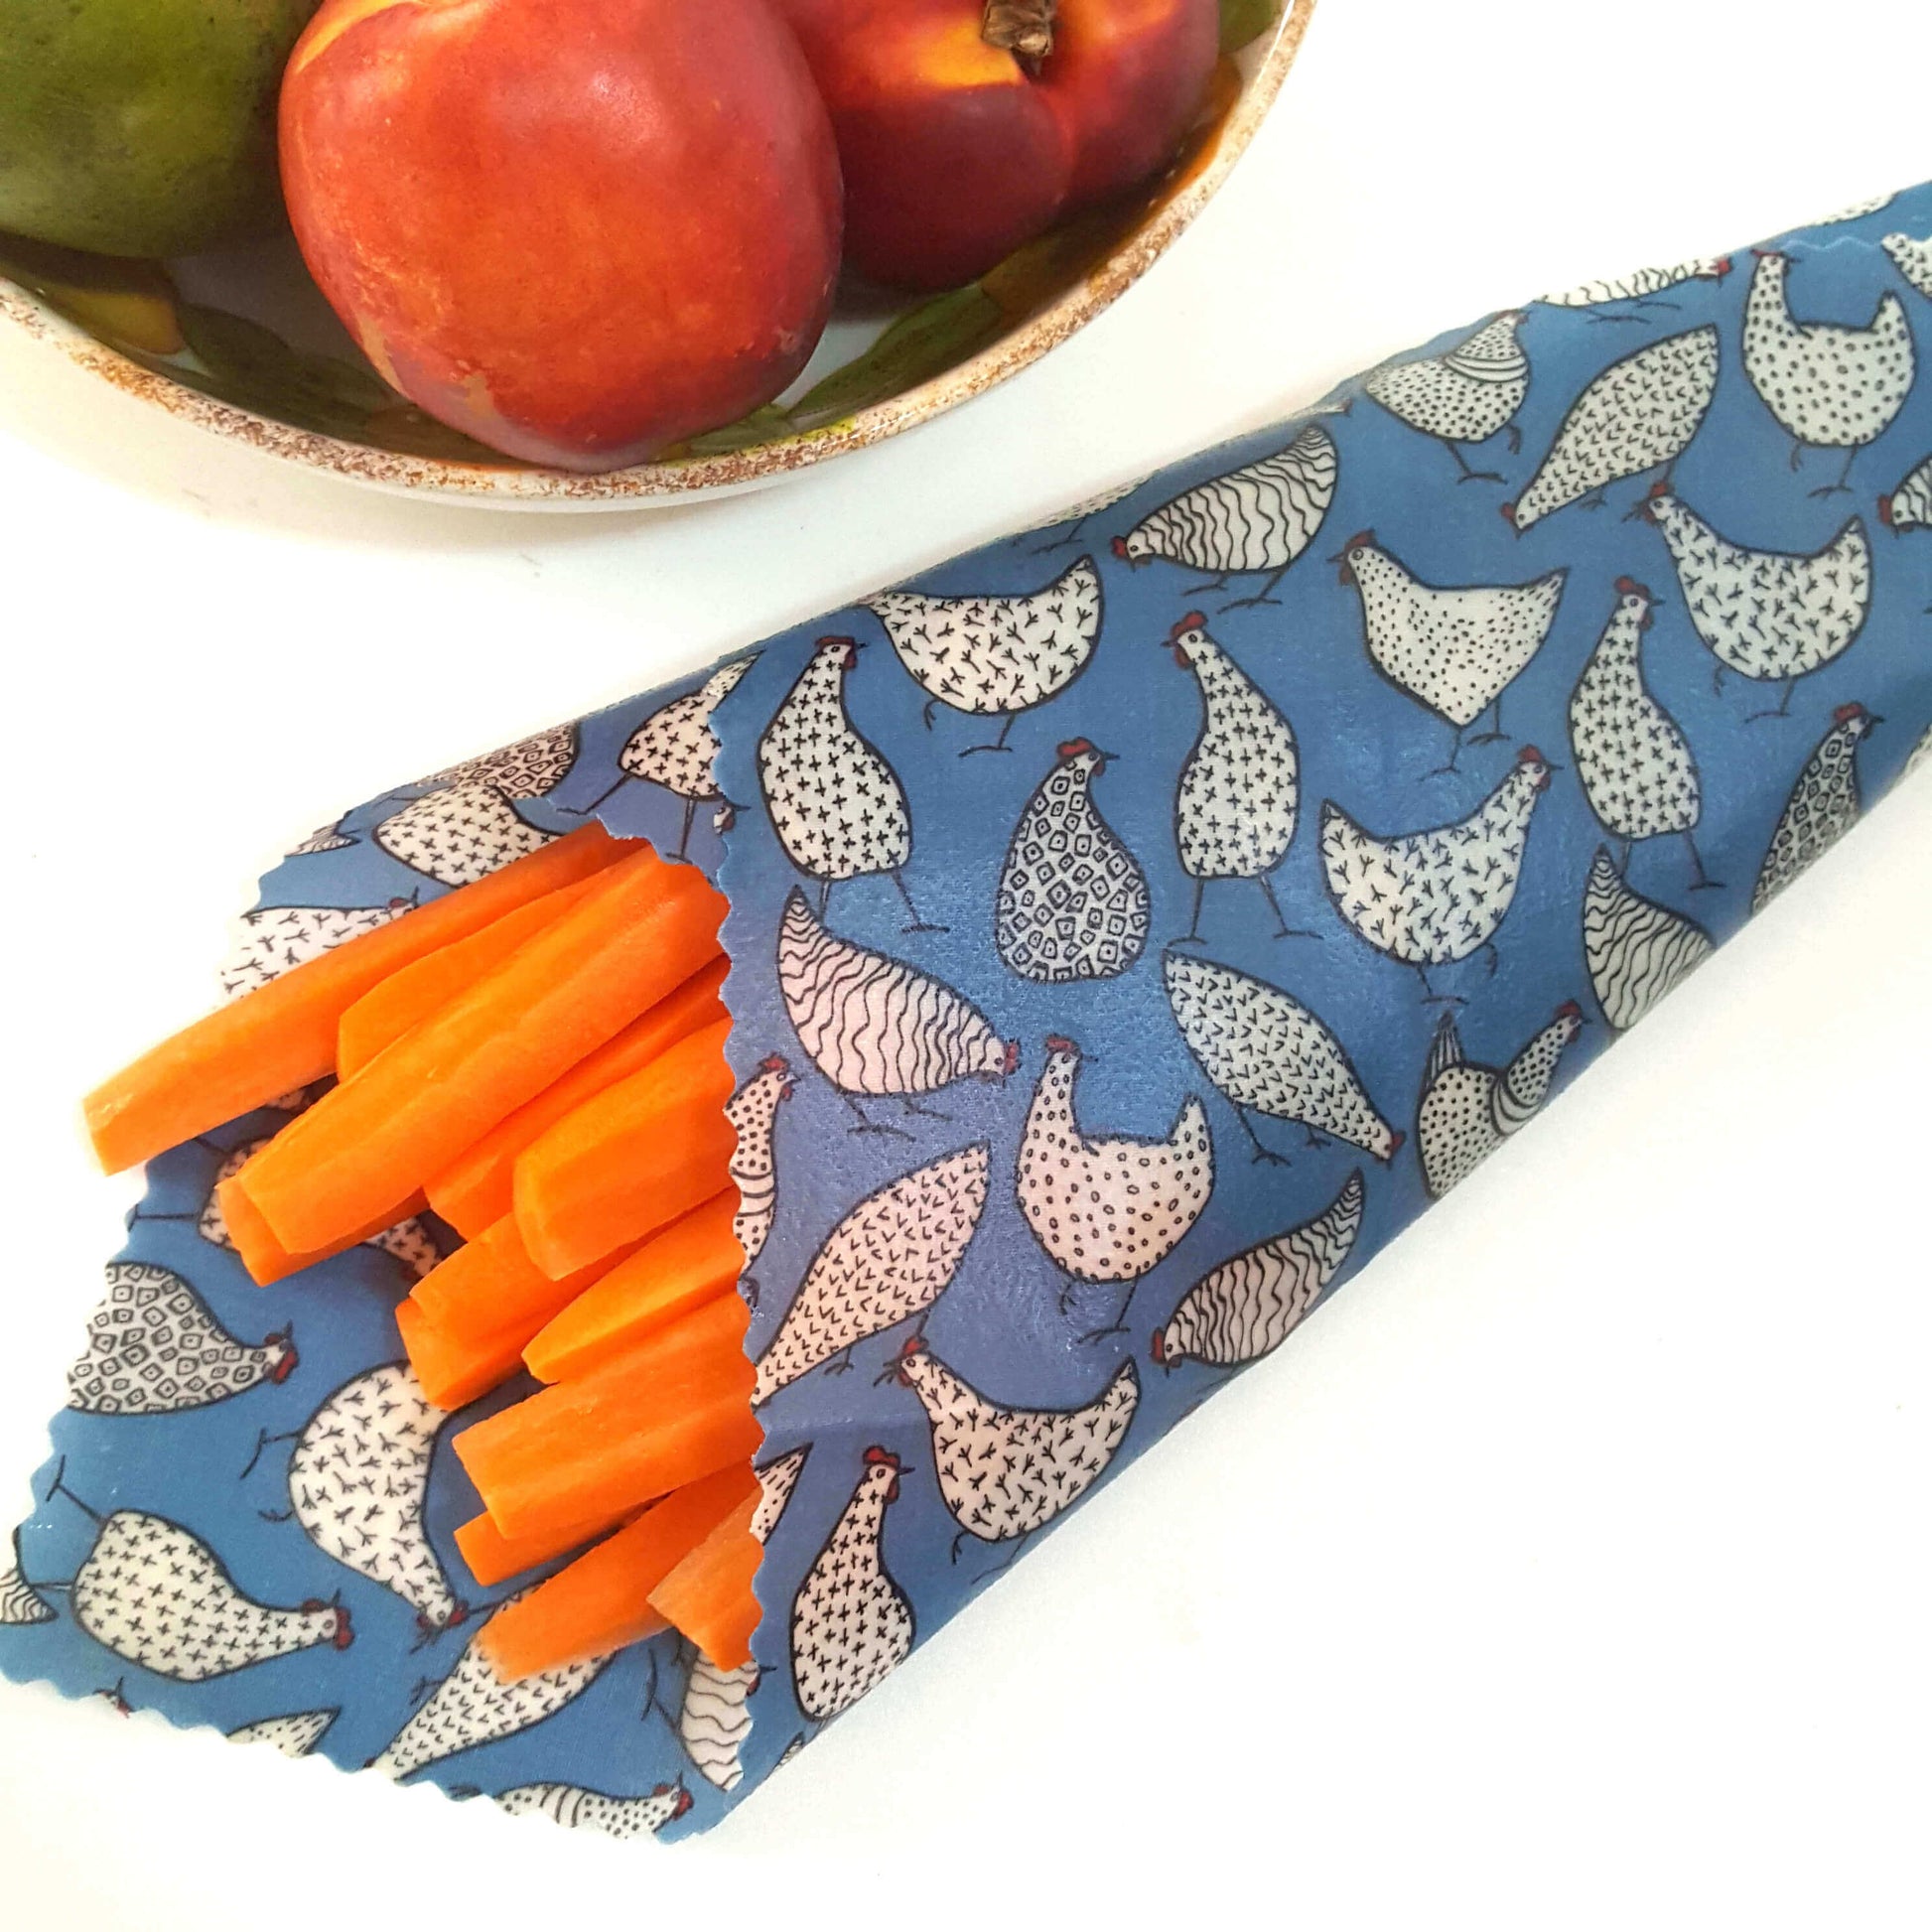 Reusable Beeswax Food Wraps 100% Hand Made in the UK by Honey Bee Good. Planet-Kind single large beeswax wrap in Blue Hens pattern as flatlay with carrots